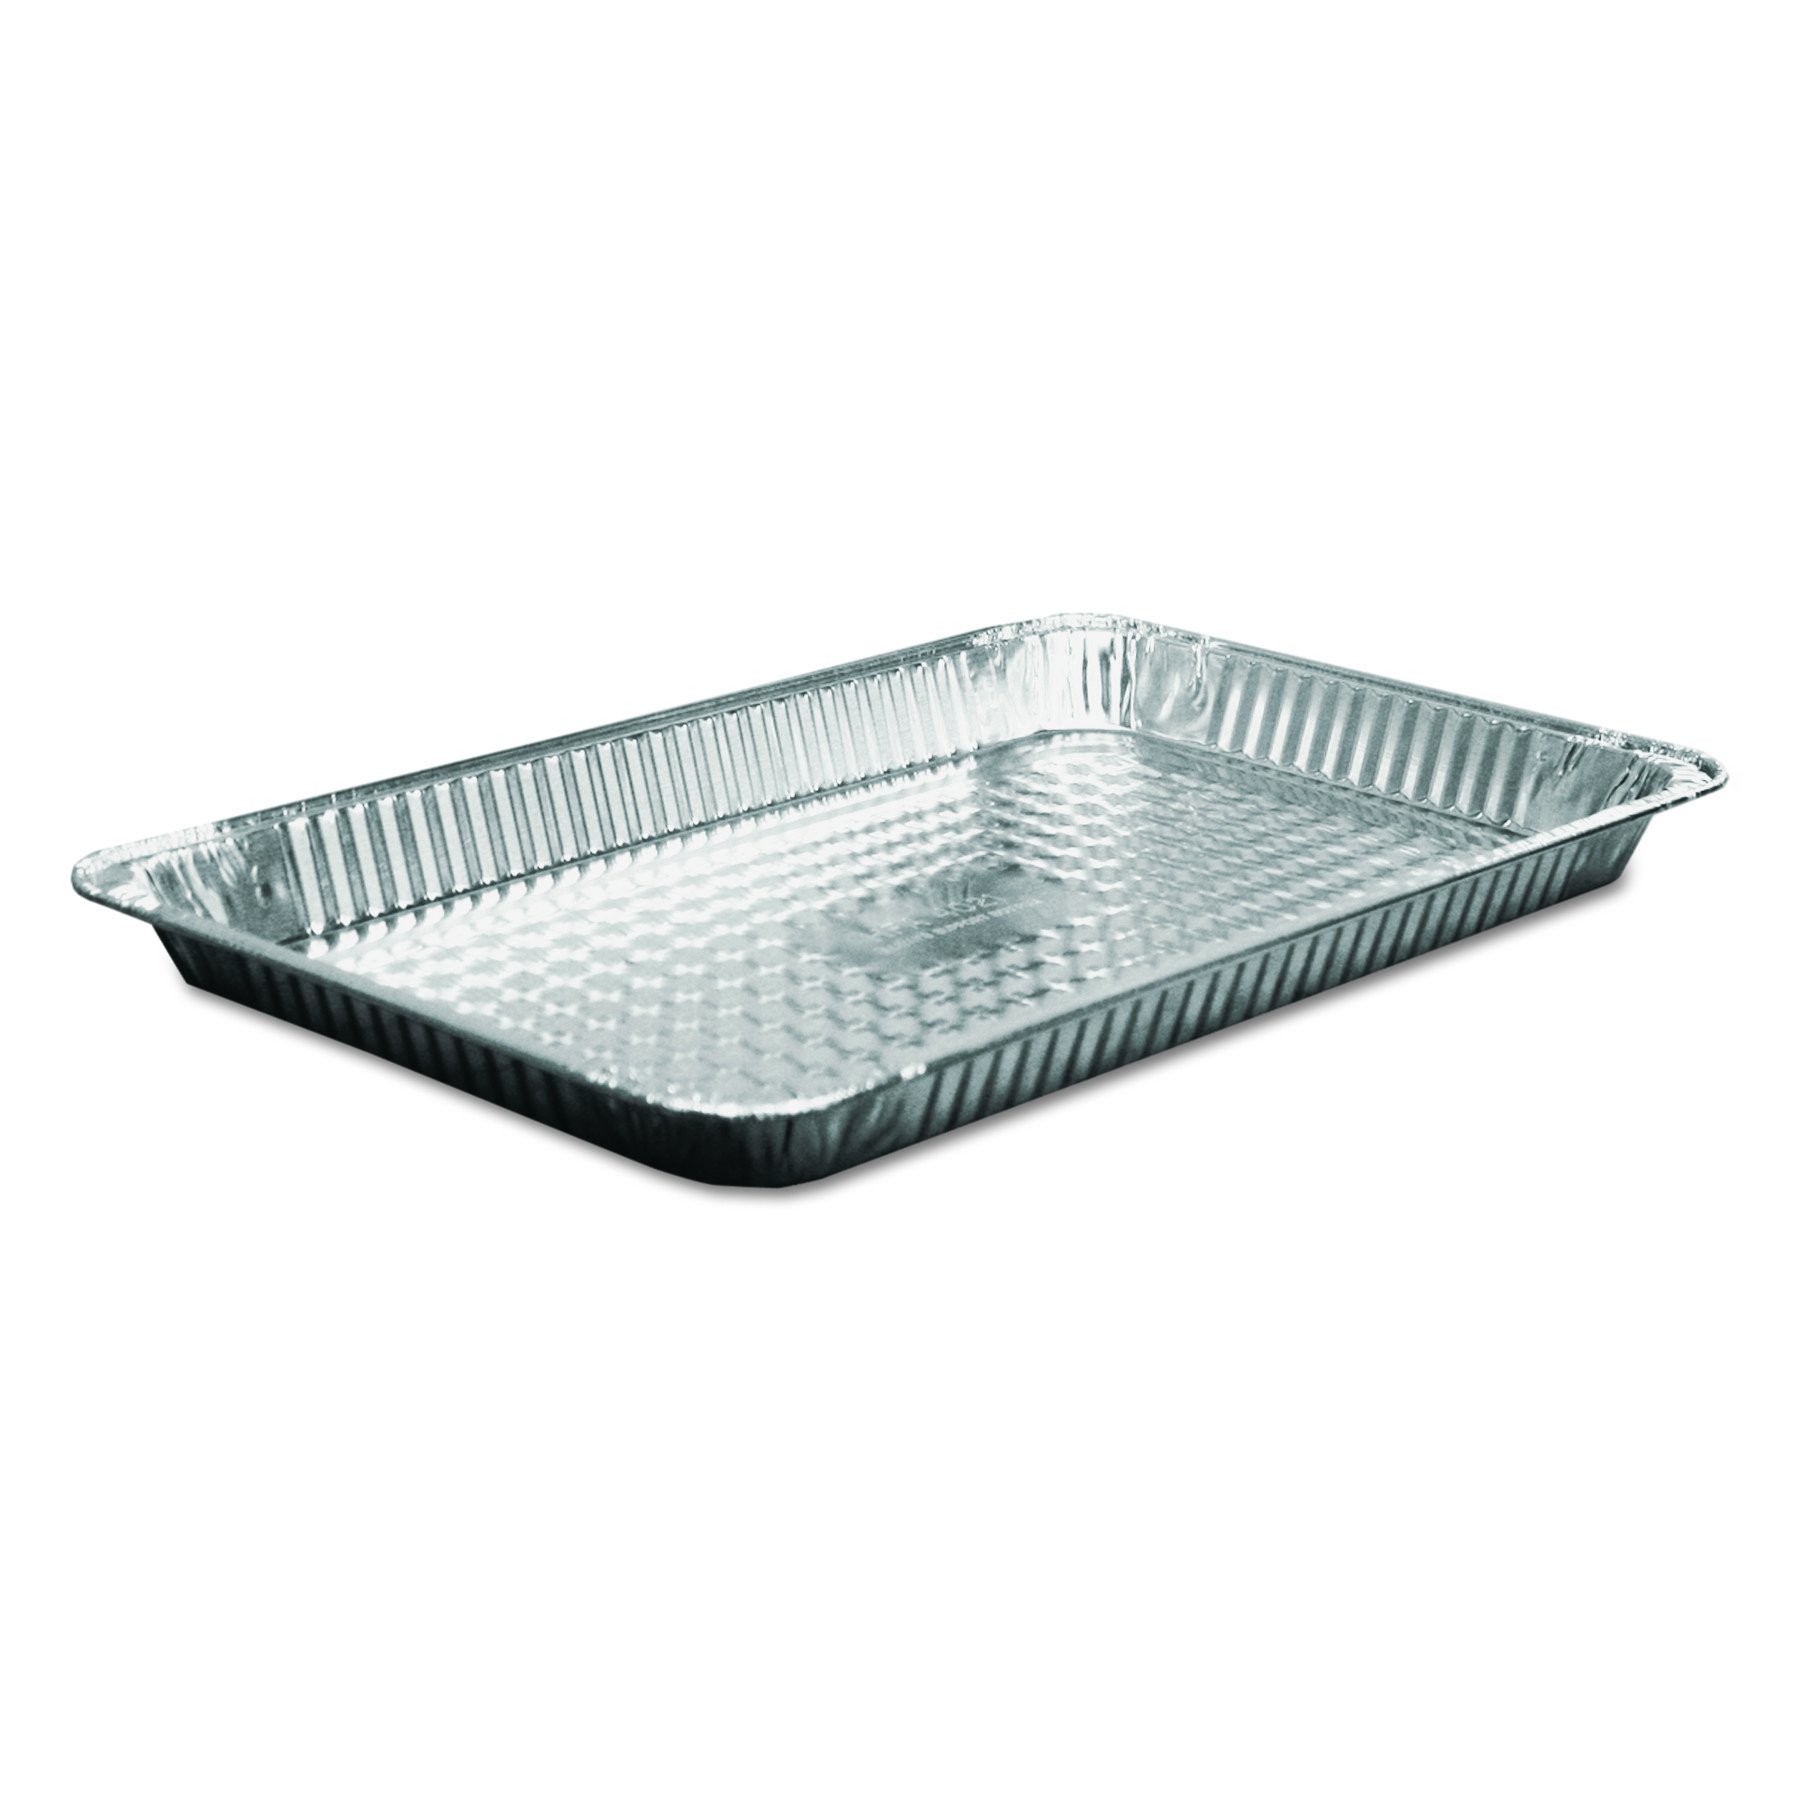 Shallow Full Size Steam Table Pan - 20 3/4in x 12 3/4in x 2 3/16in